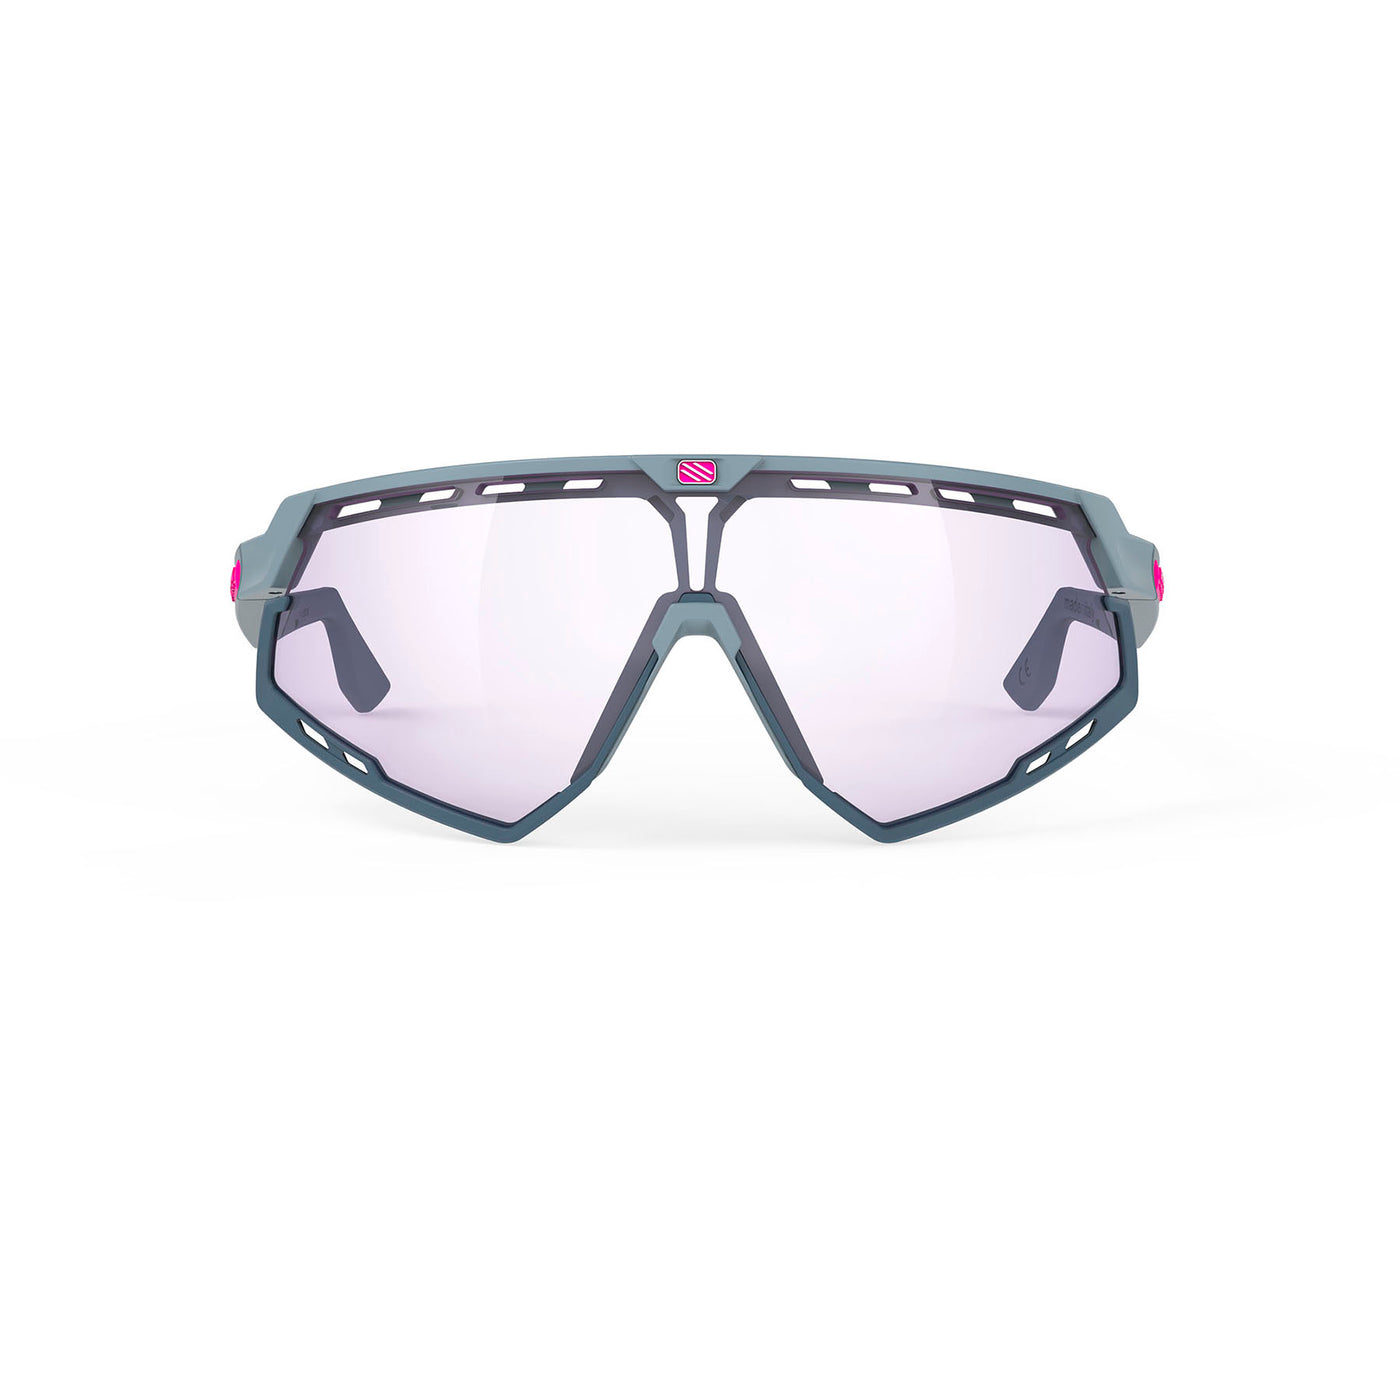 Rudy Project running and cycling sport sunglasses#color_defender-glacier-matte-frame-and-impactx-photochromic-2-laser-purple-lenses-blue-bumpers